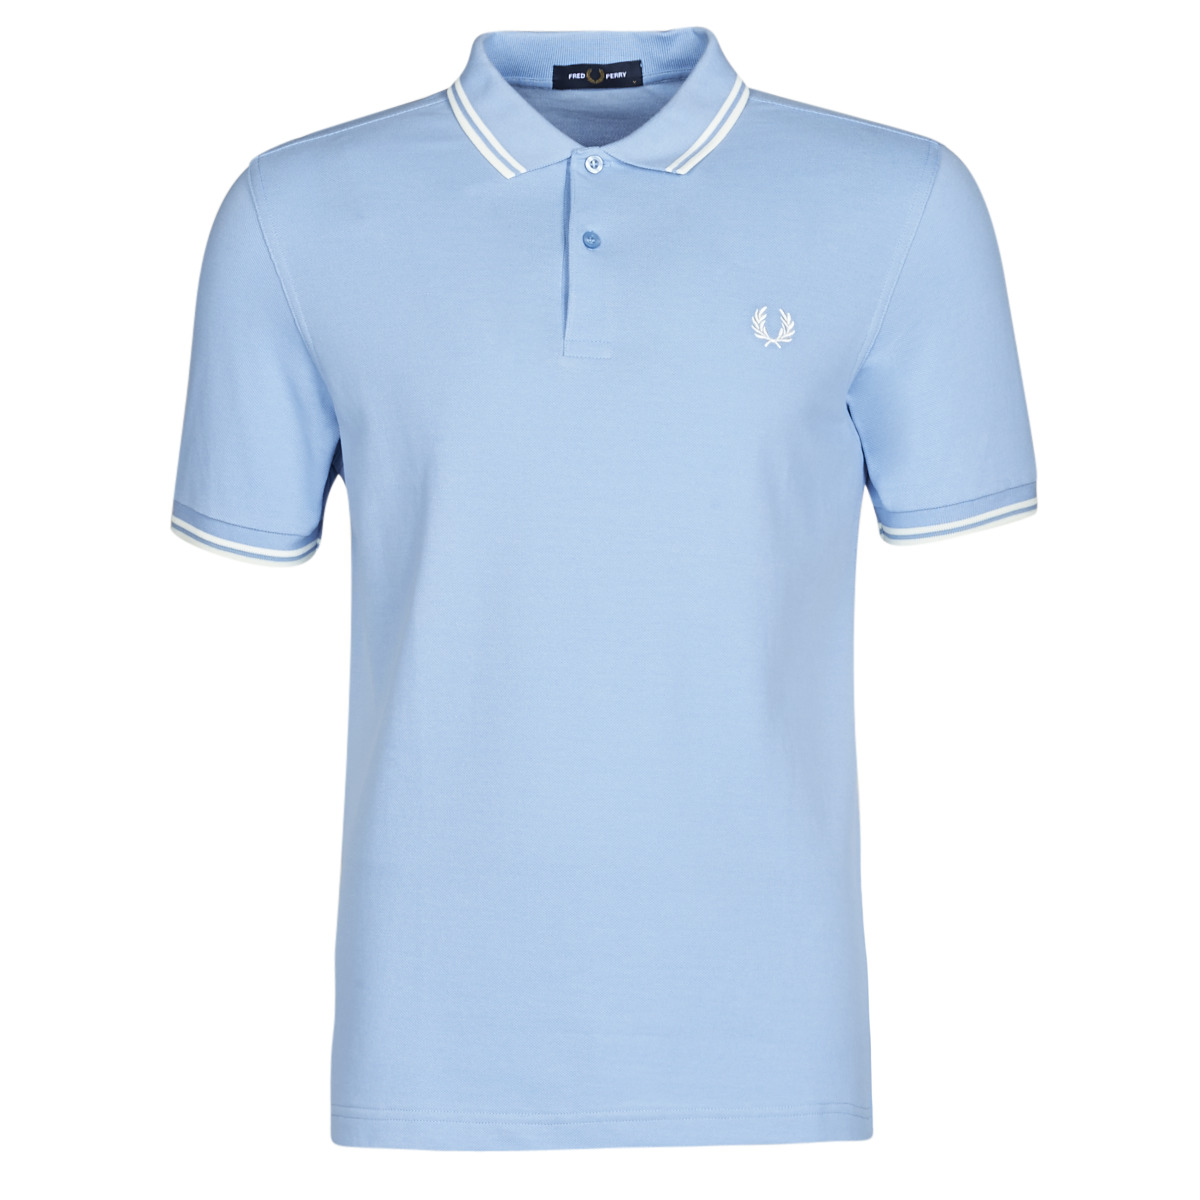 Fred Perry Bleu TWIN TIPPED FRED PERRY SHIRT I2bZH5I9